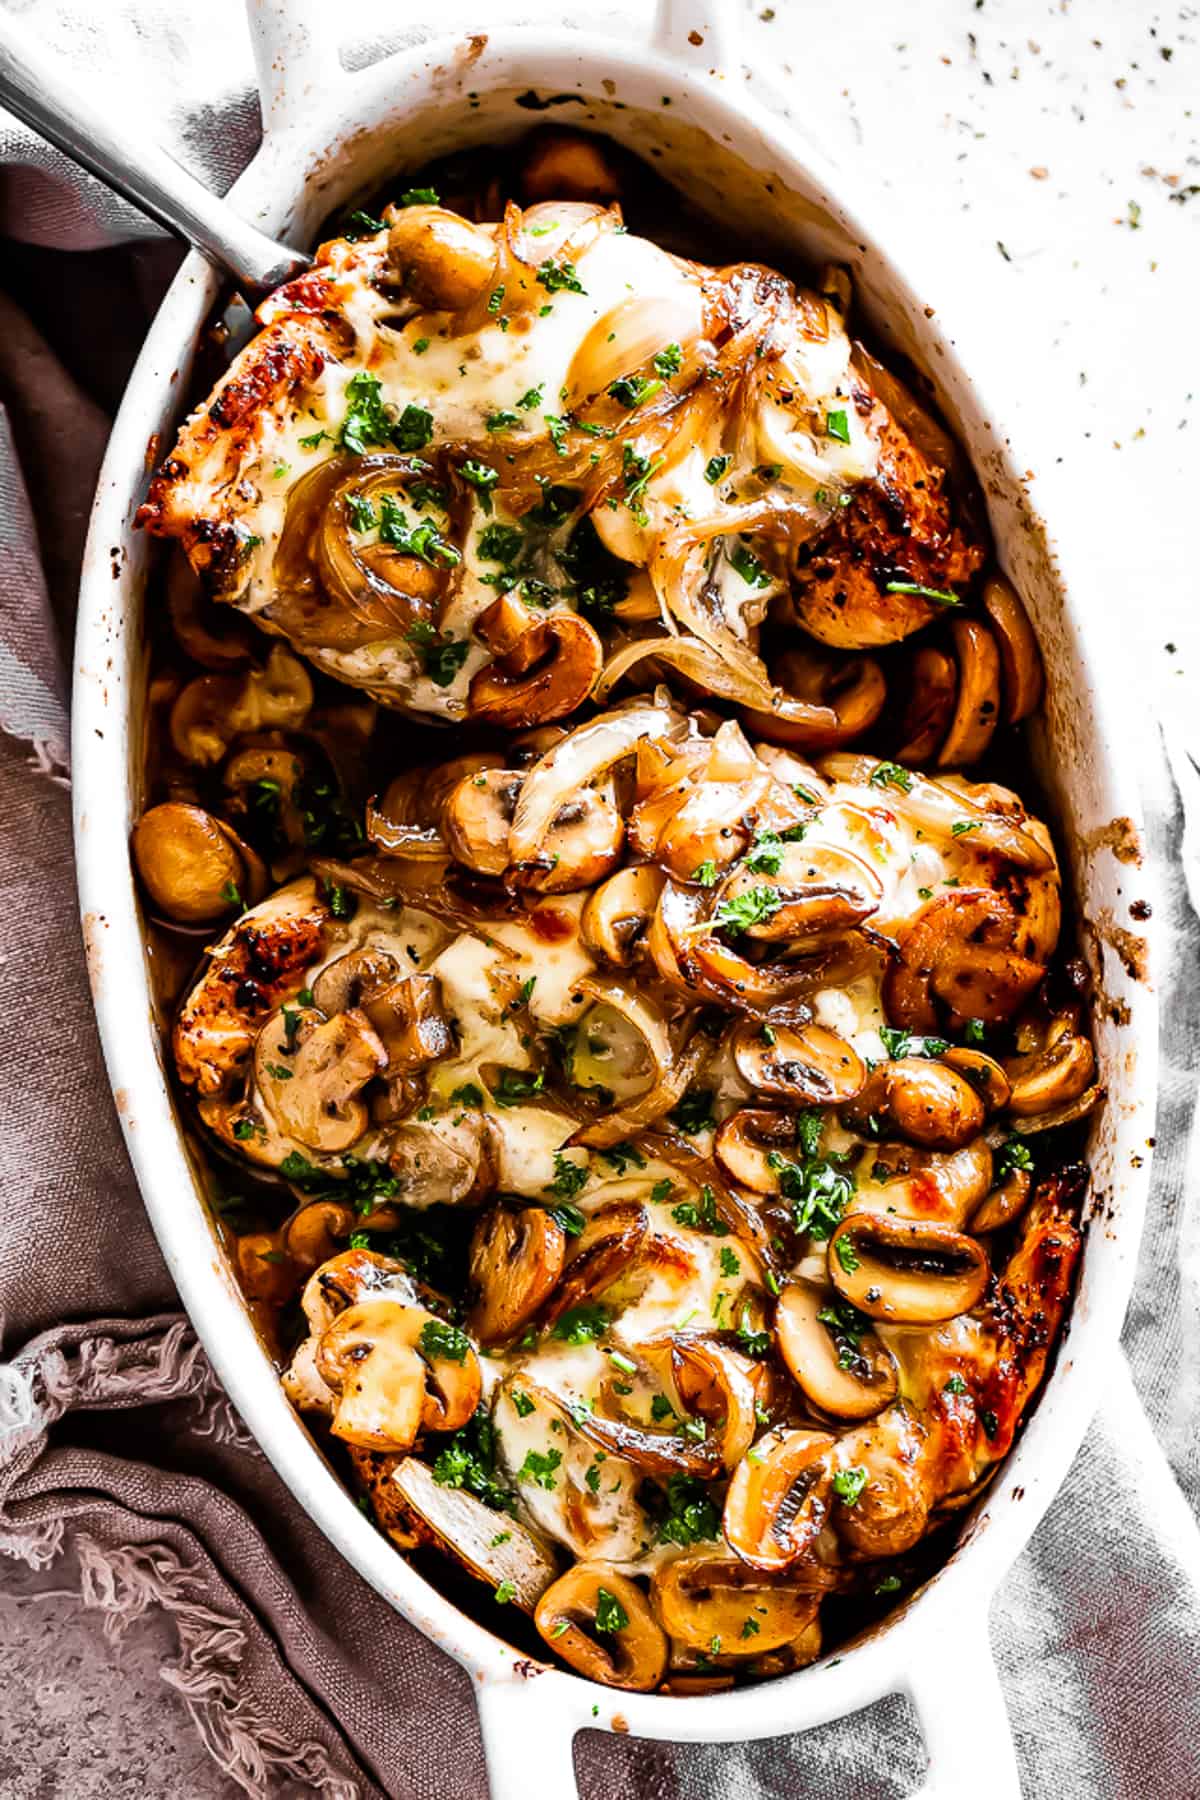 Cheesy Baked Chicken with Mushrooms and Herbs